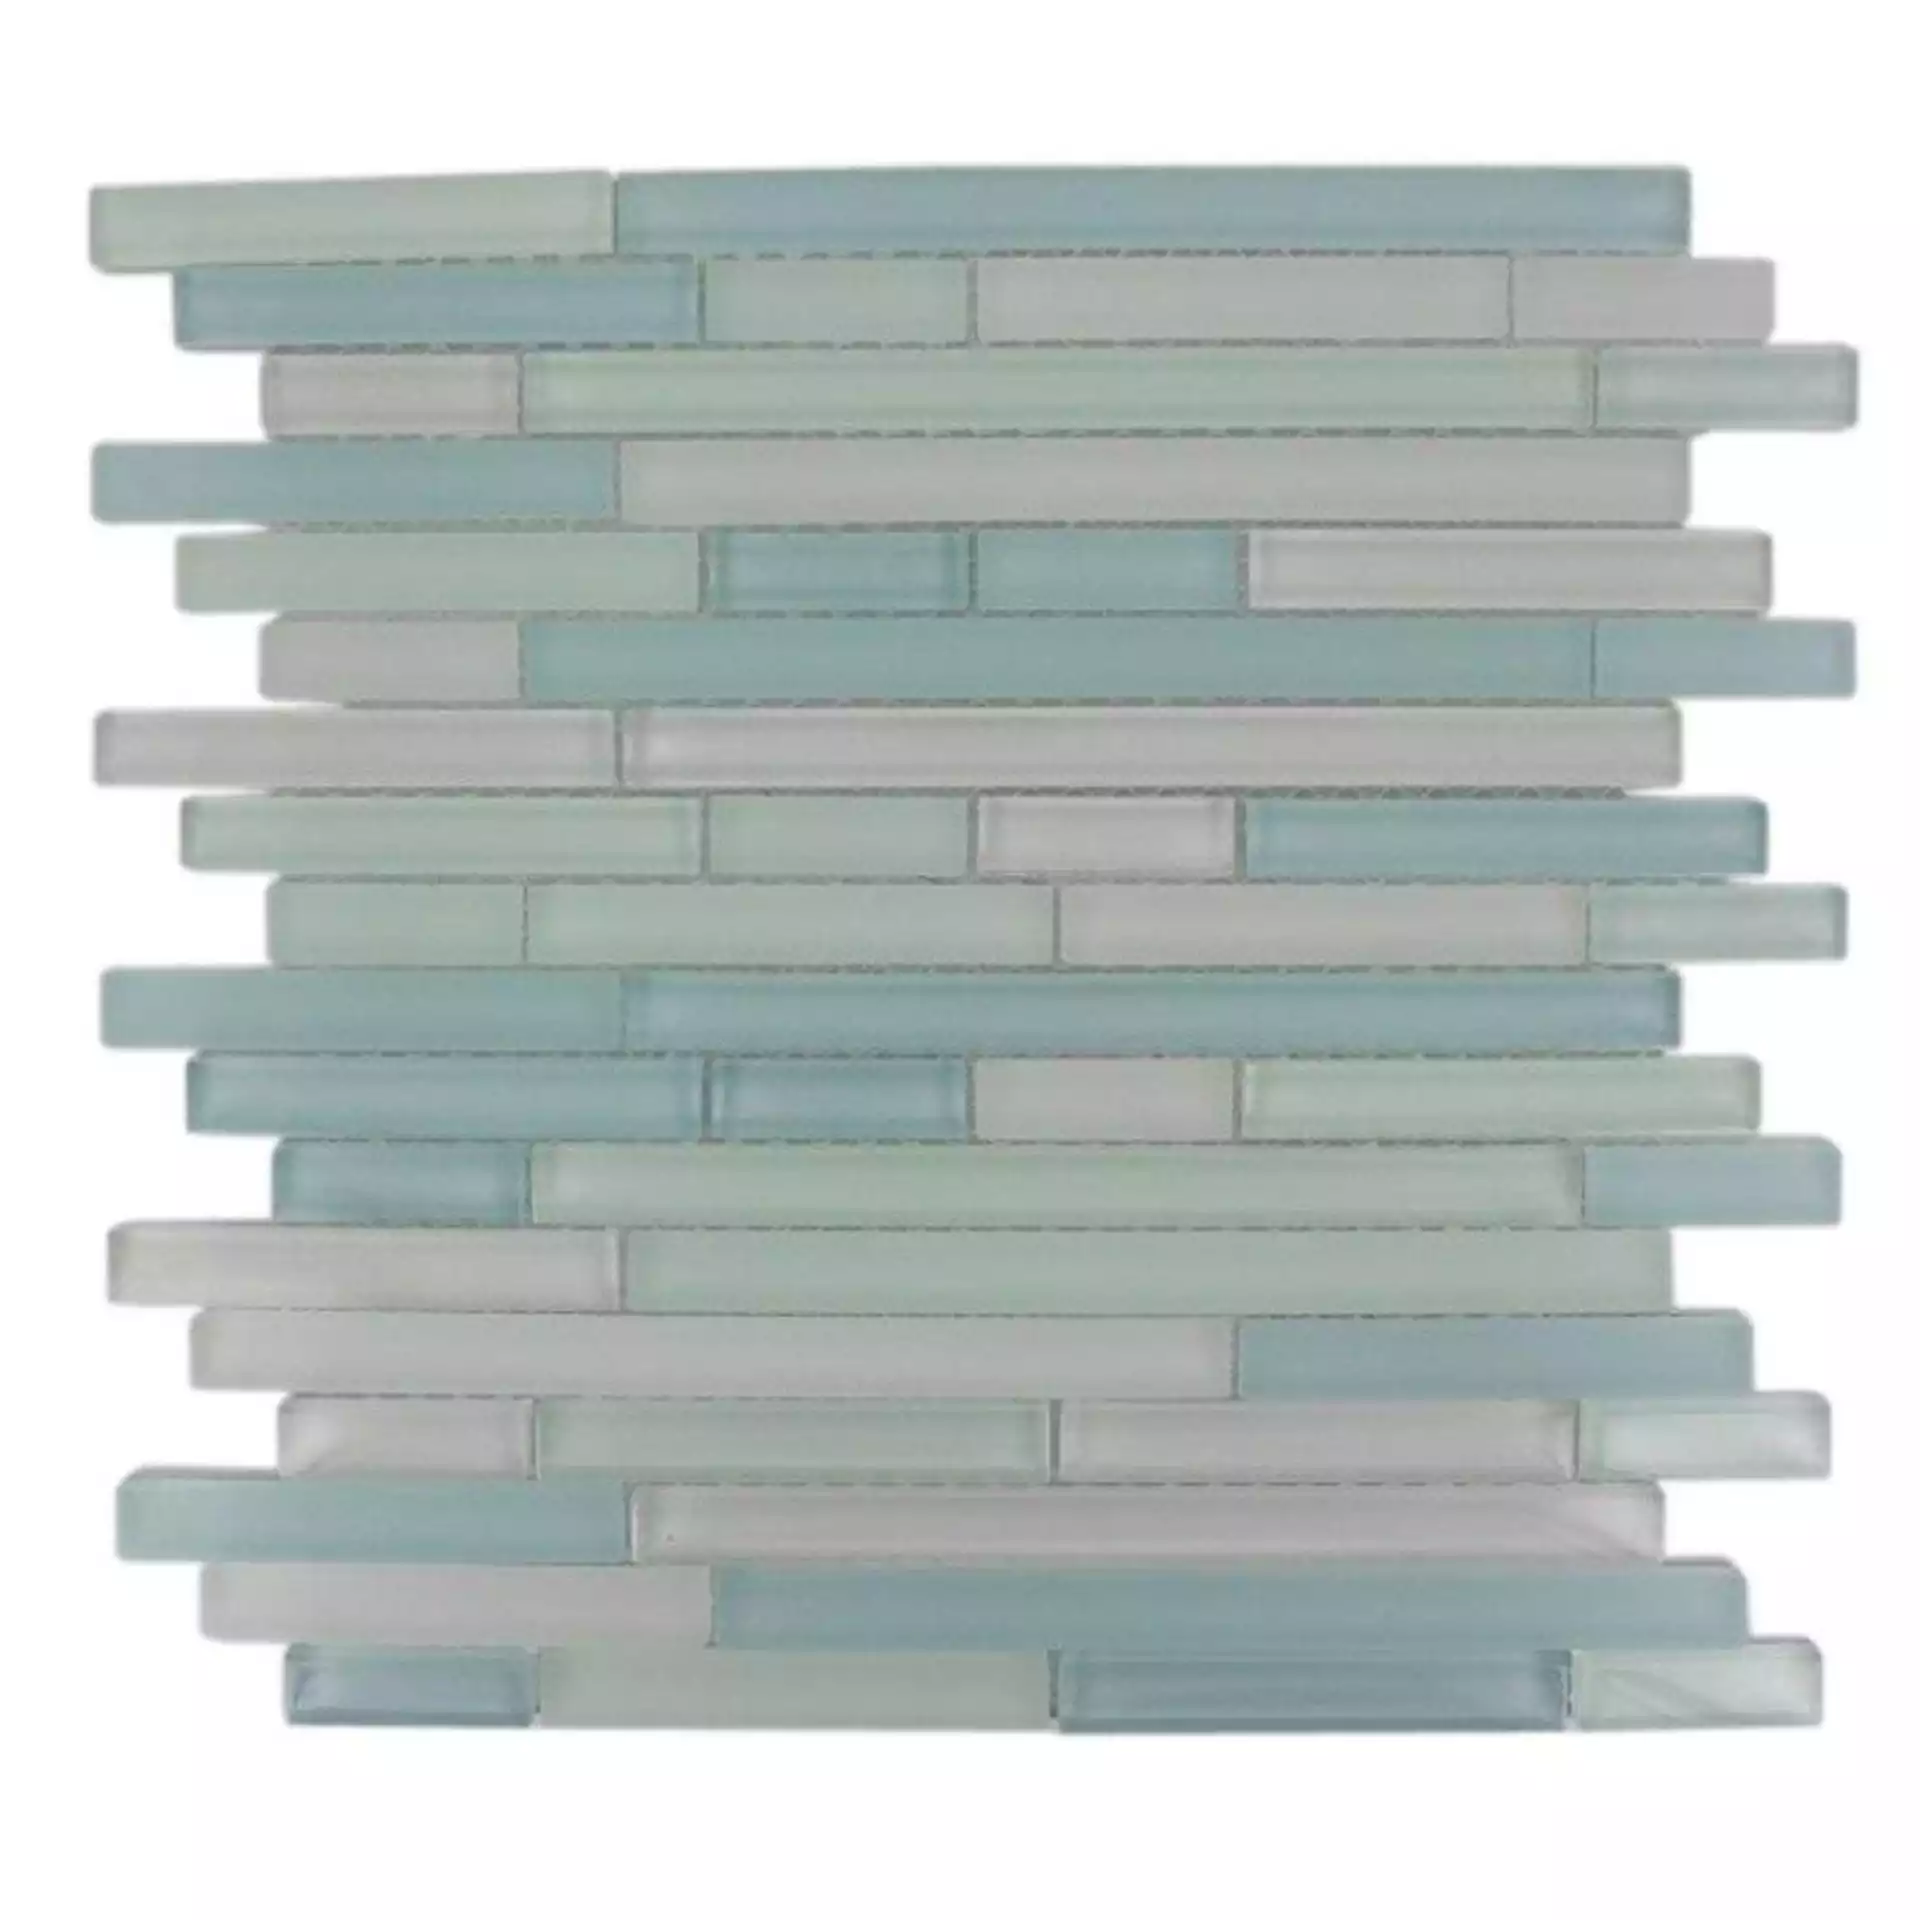 Splashback Tile Temple Coast 12 in. x 12 in. x 8 mm Glass Mosaic Floor and Wall Tile, Blues